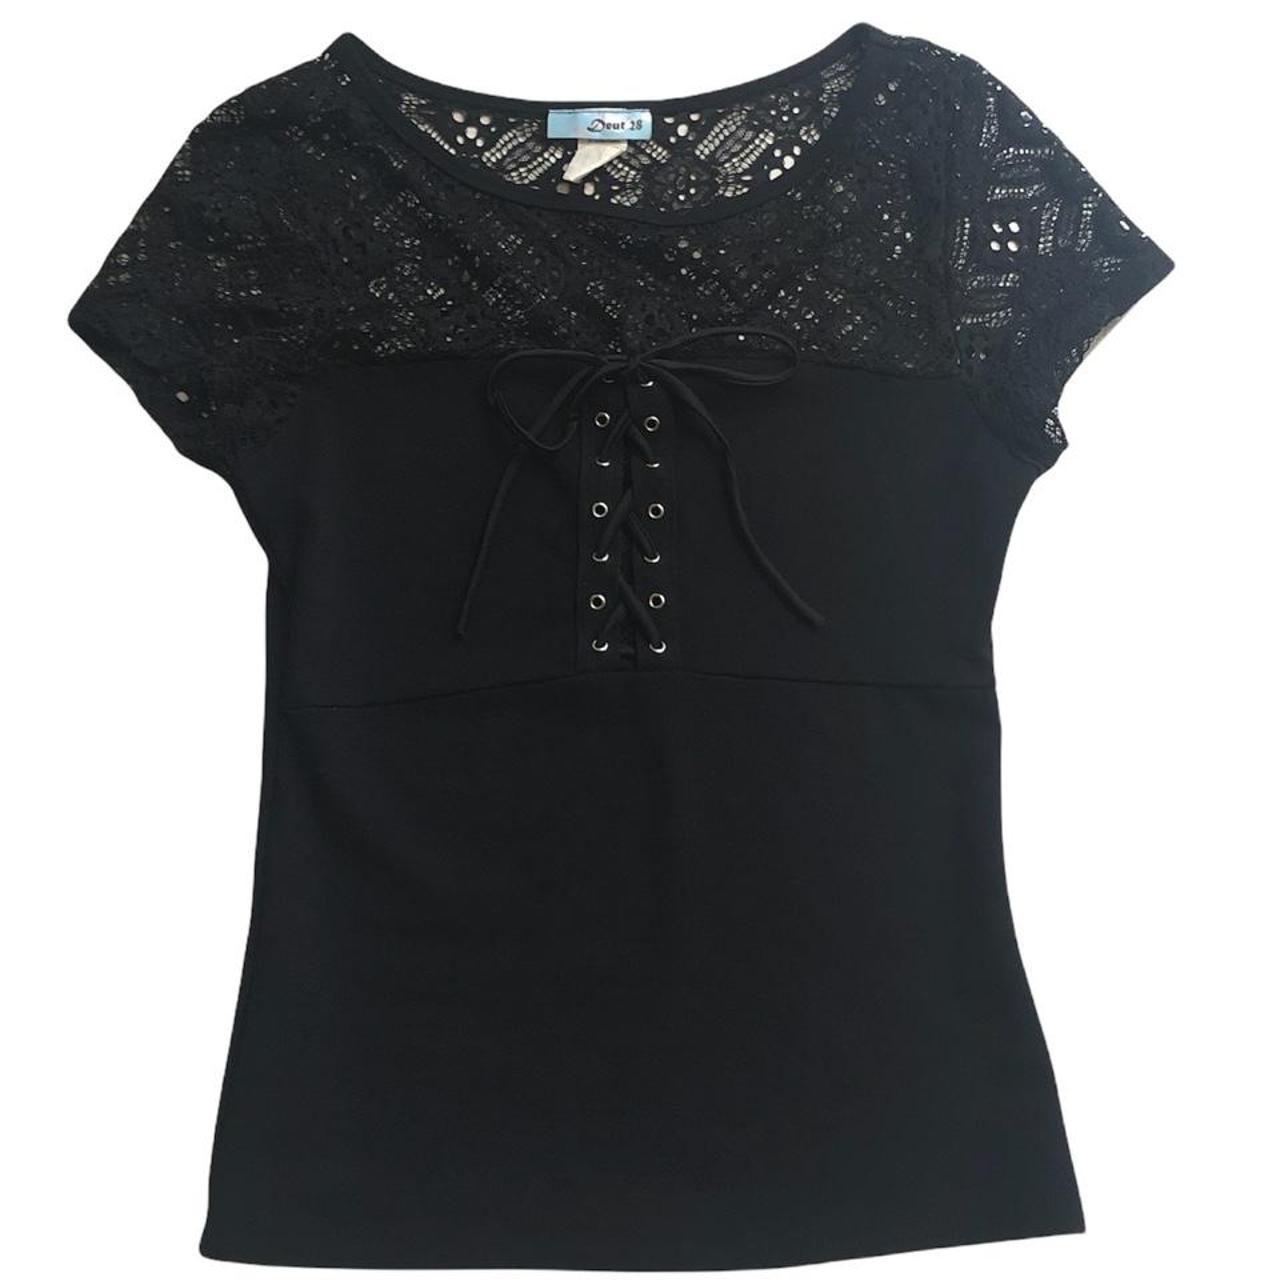 Product Image 1 - Goth black lace top <3
•
Love